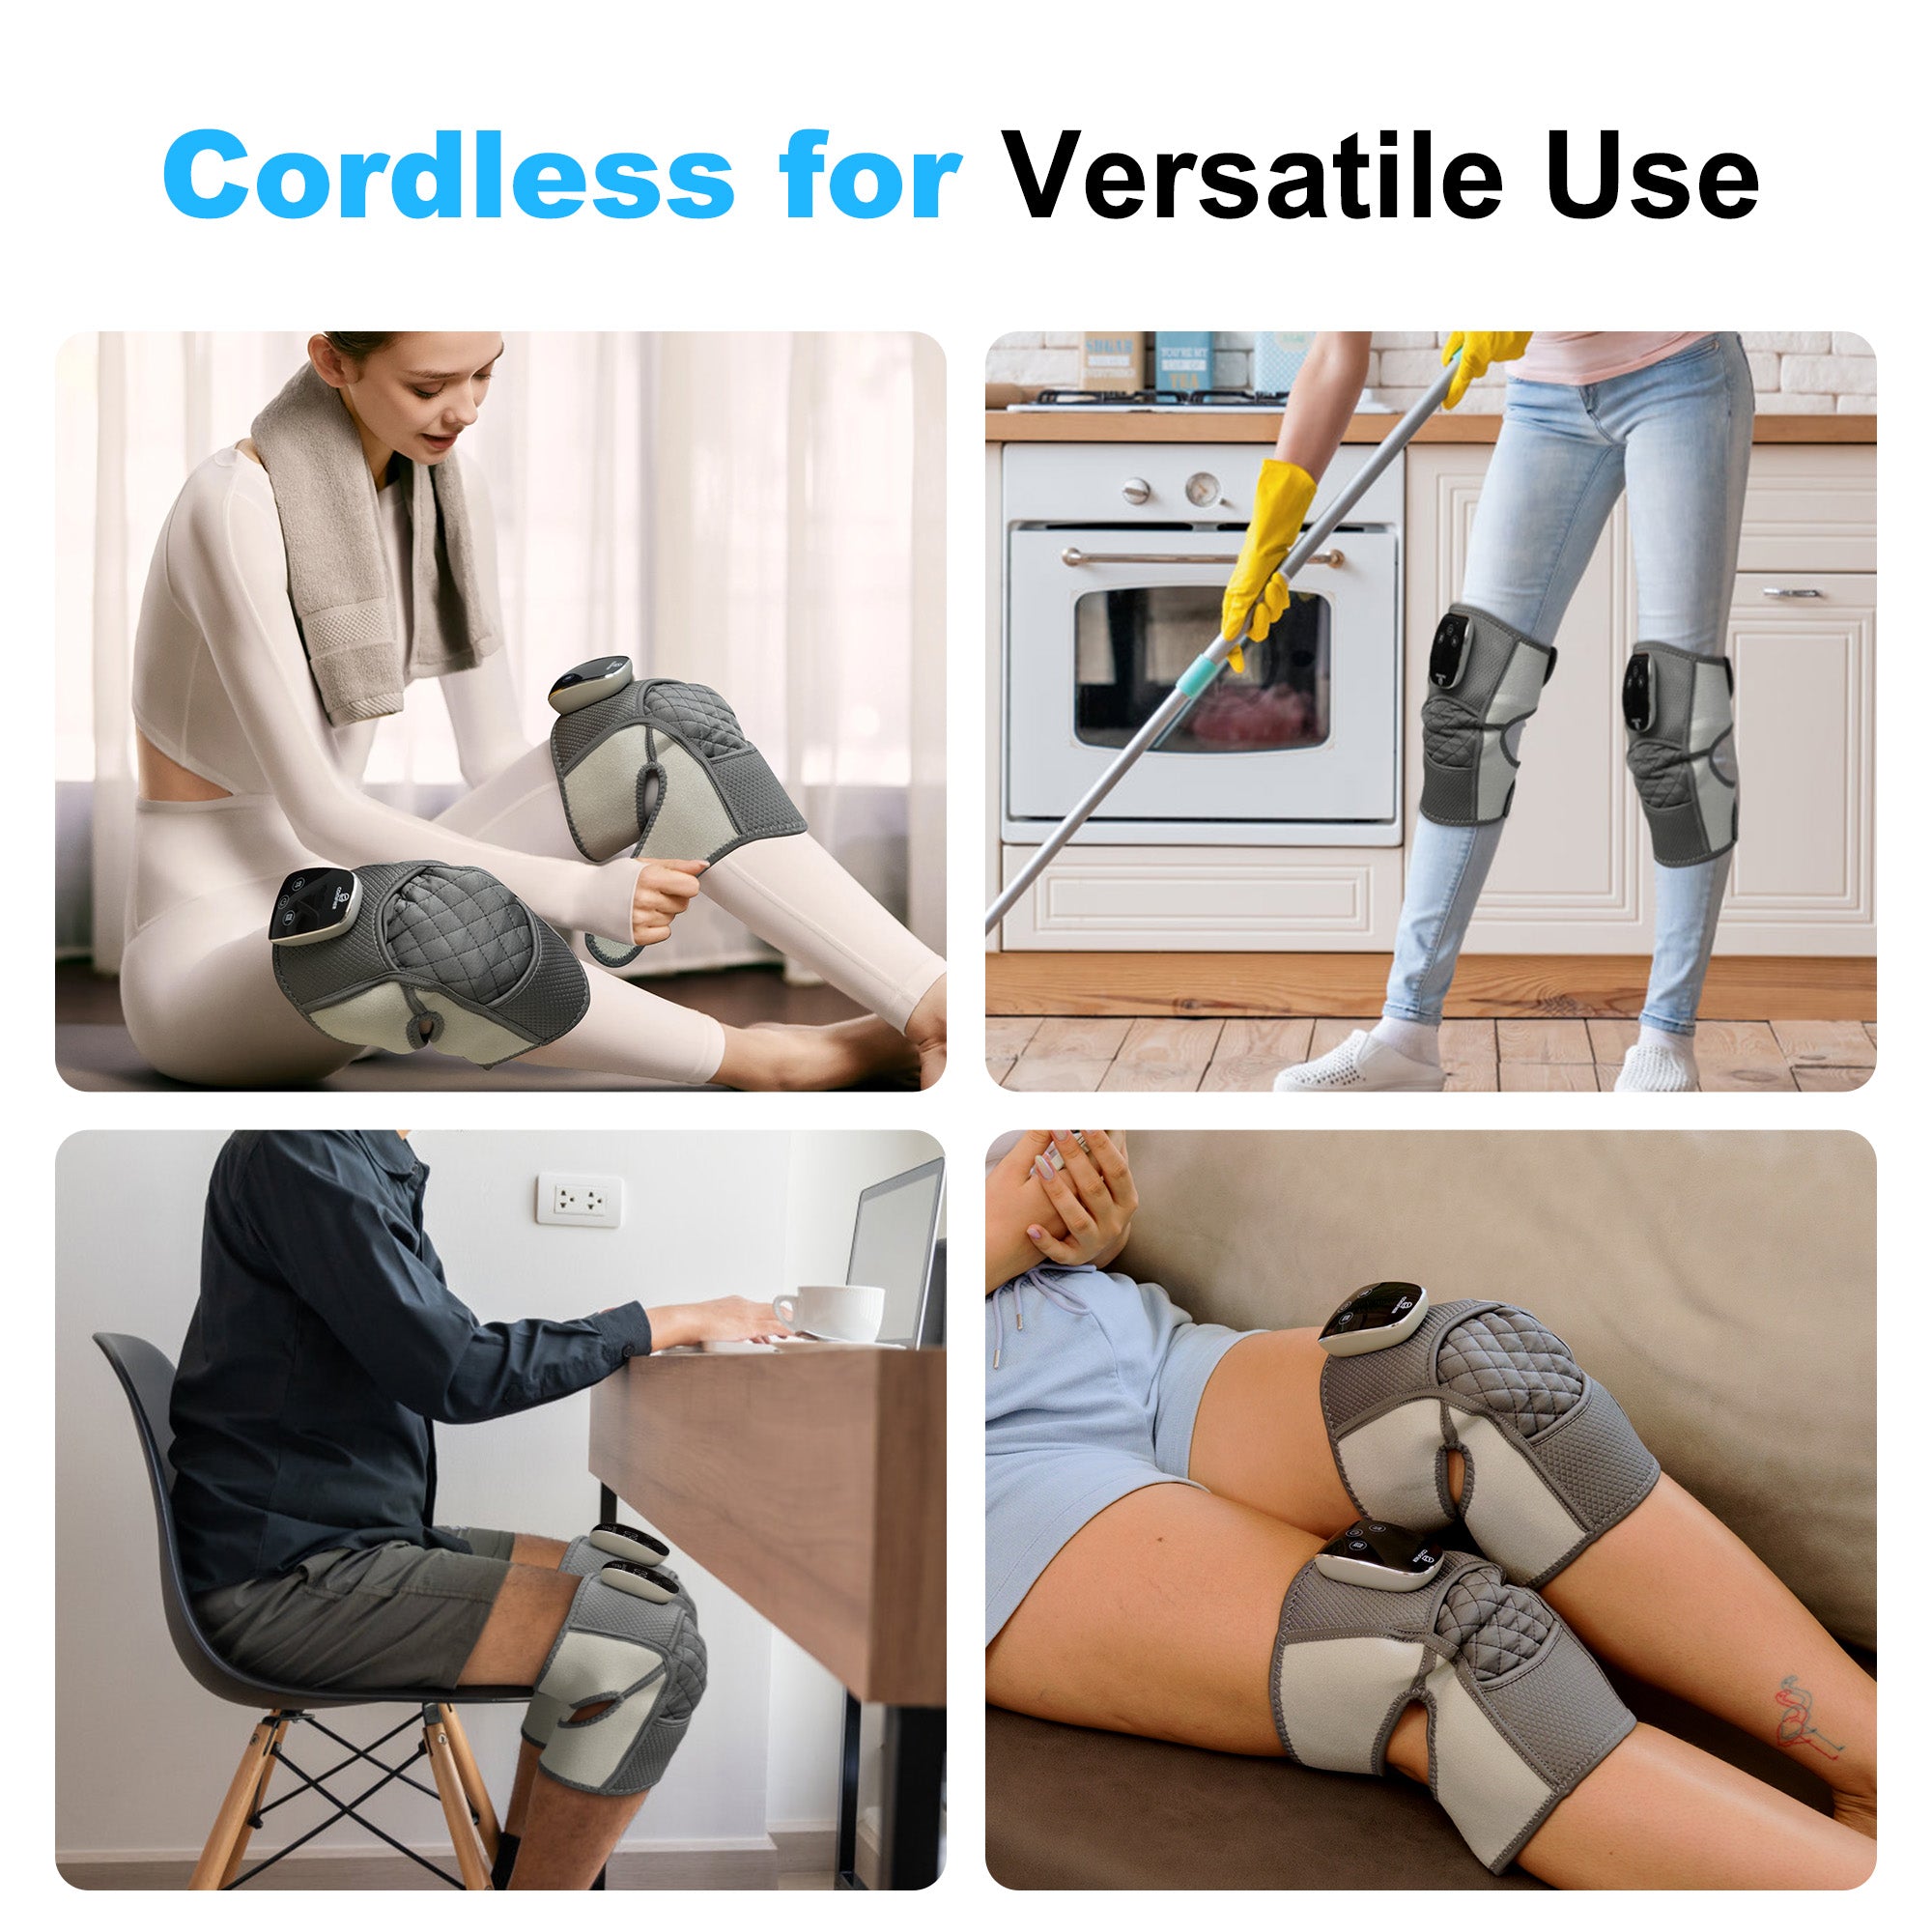 COMFIER Cordless Knee Massager with Heat, Vibration Knee Brace Wrap for Arthritis Pain Relief, 3-in-1 Heating Pad for Knee Shoulder Elbow, Knee Warmer, Electric Knee Support Pad Sleeve (Pair Pack) CF-5321